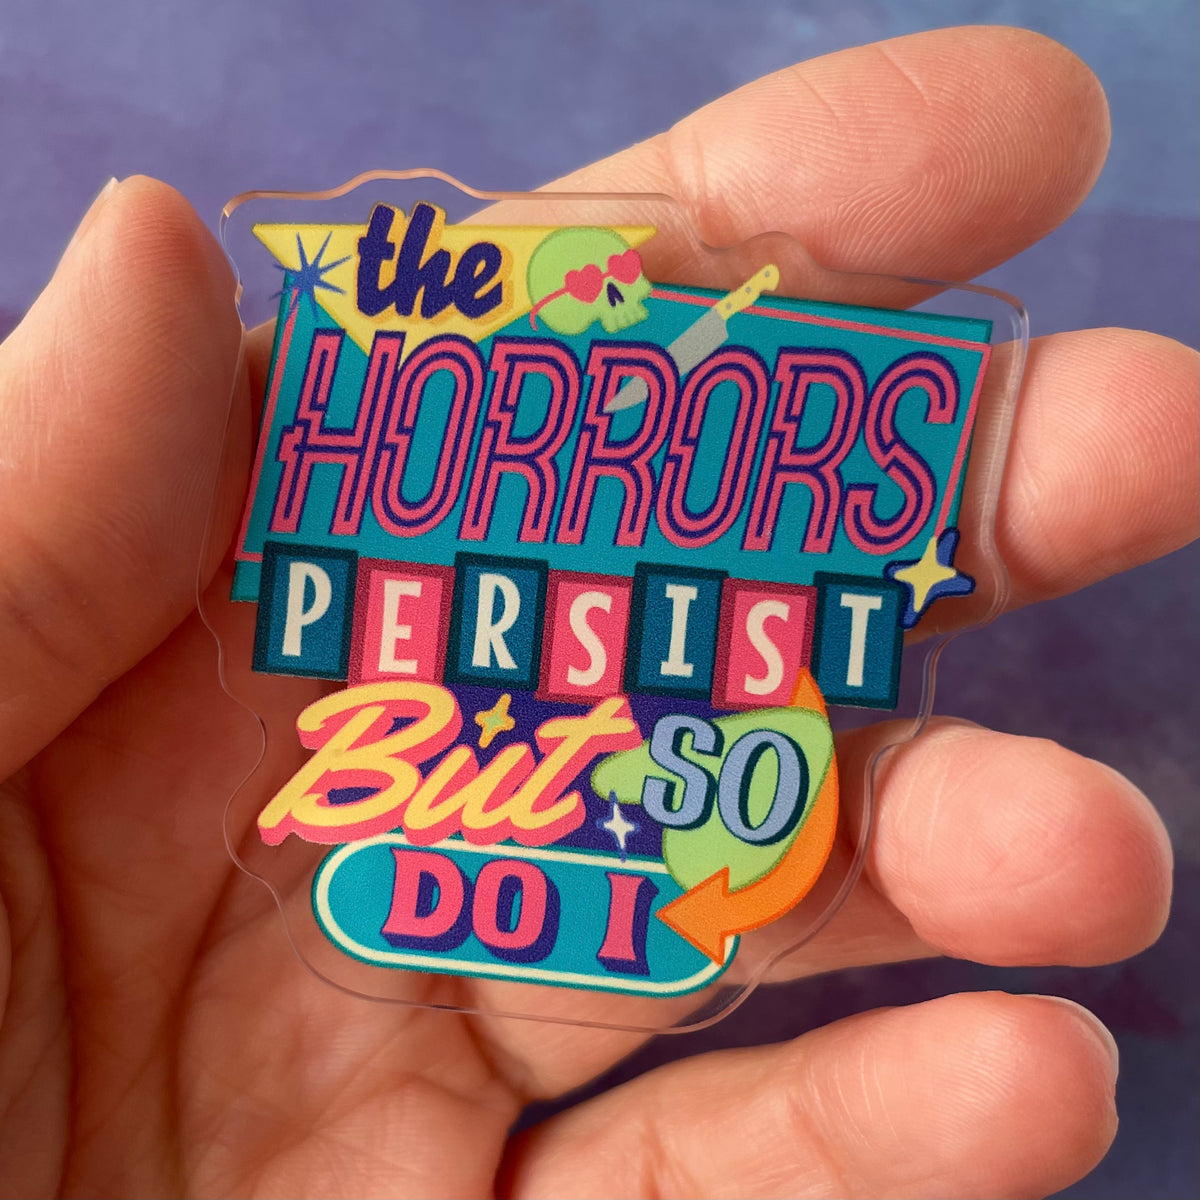 The Horrors Persist - Acrylic Swappable Badge Reel Design TOP